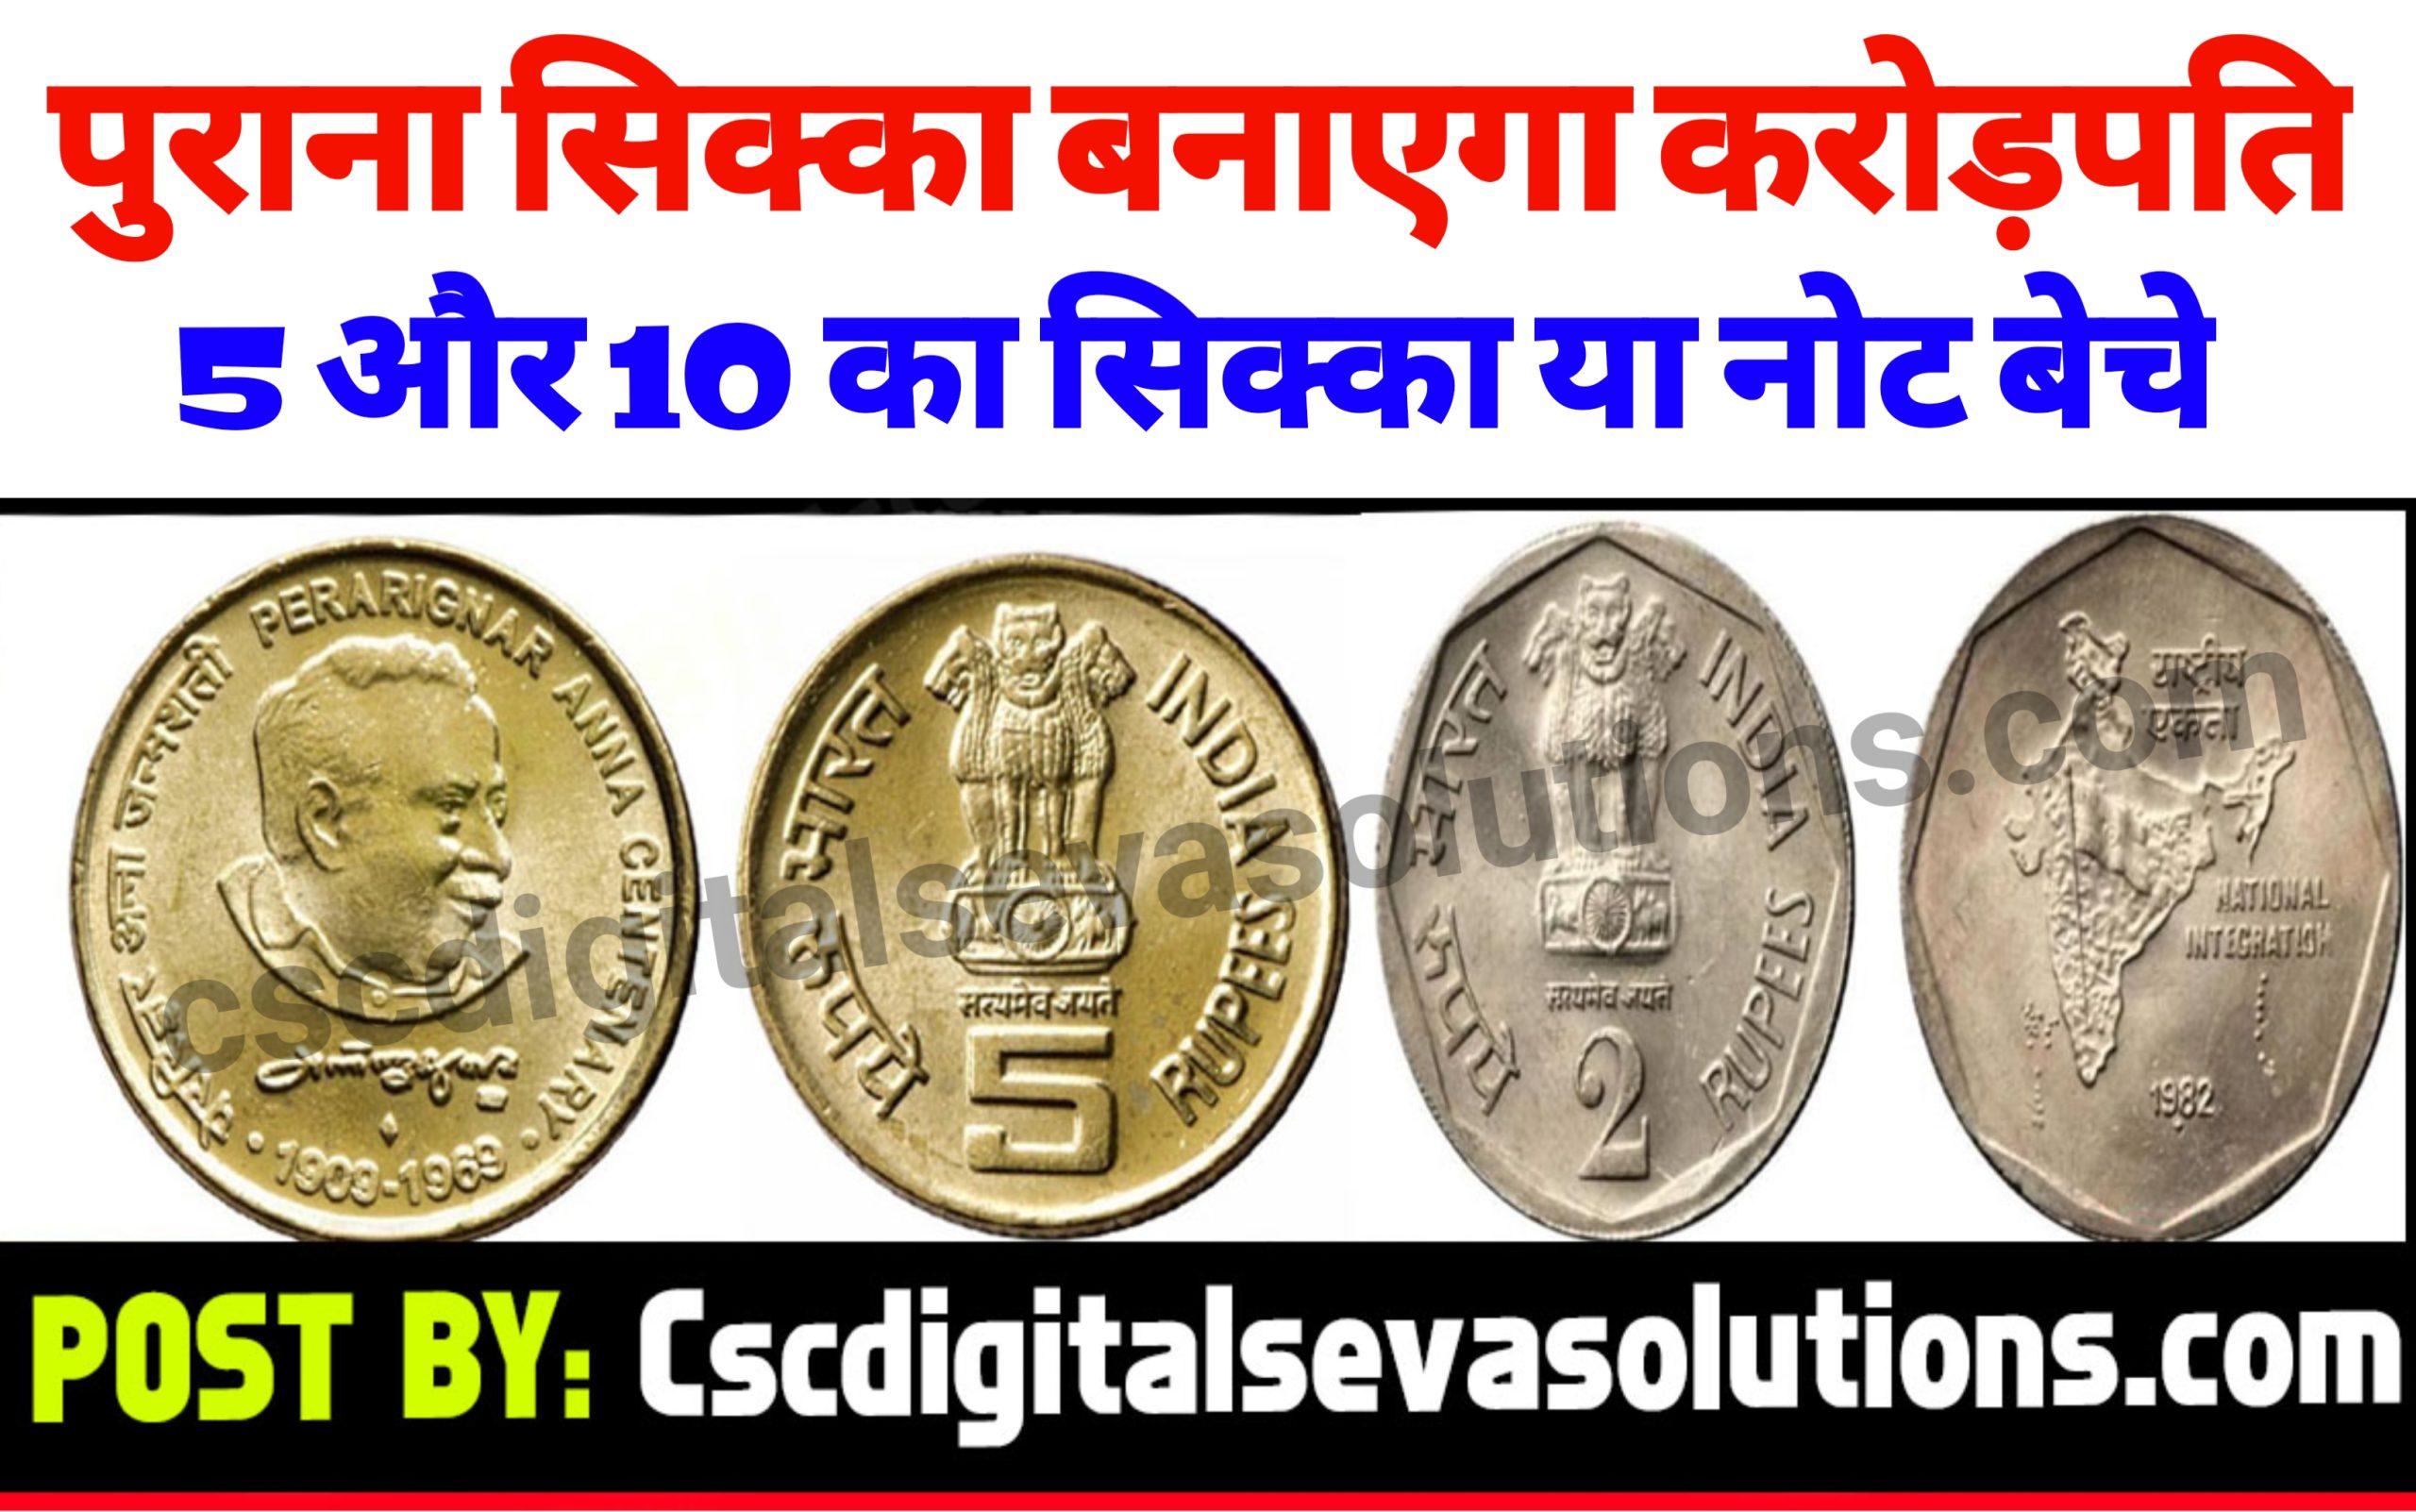 purana paisa online kaise beche | old note sale | purana rupya sell 2022 | purana note kaaise beche | purana sikka kaise beche